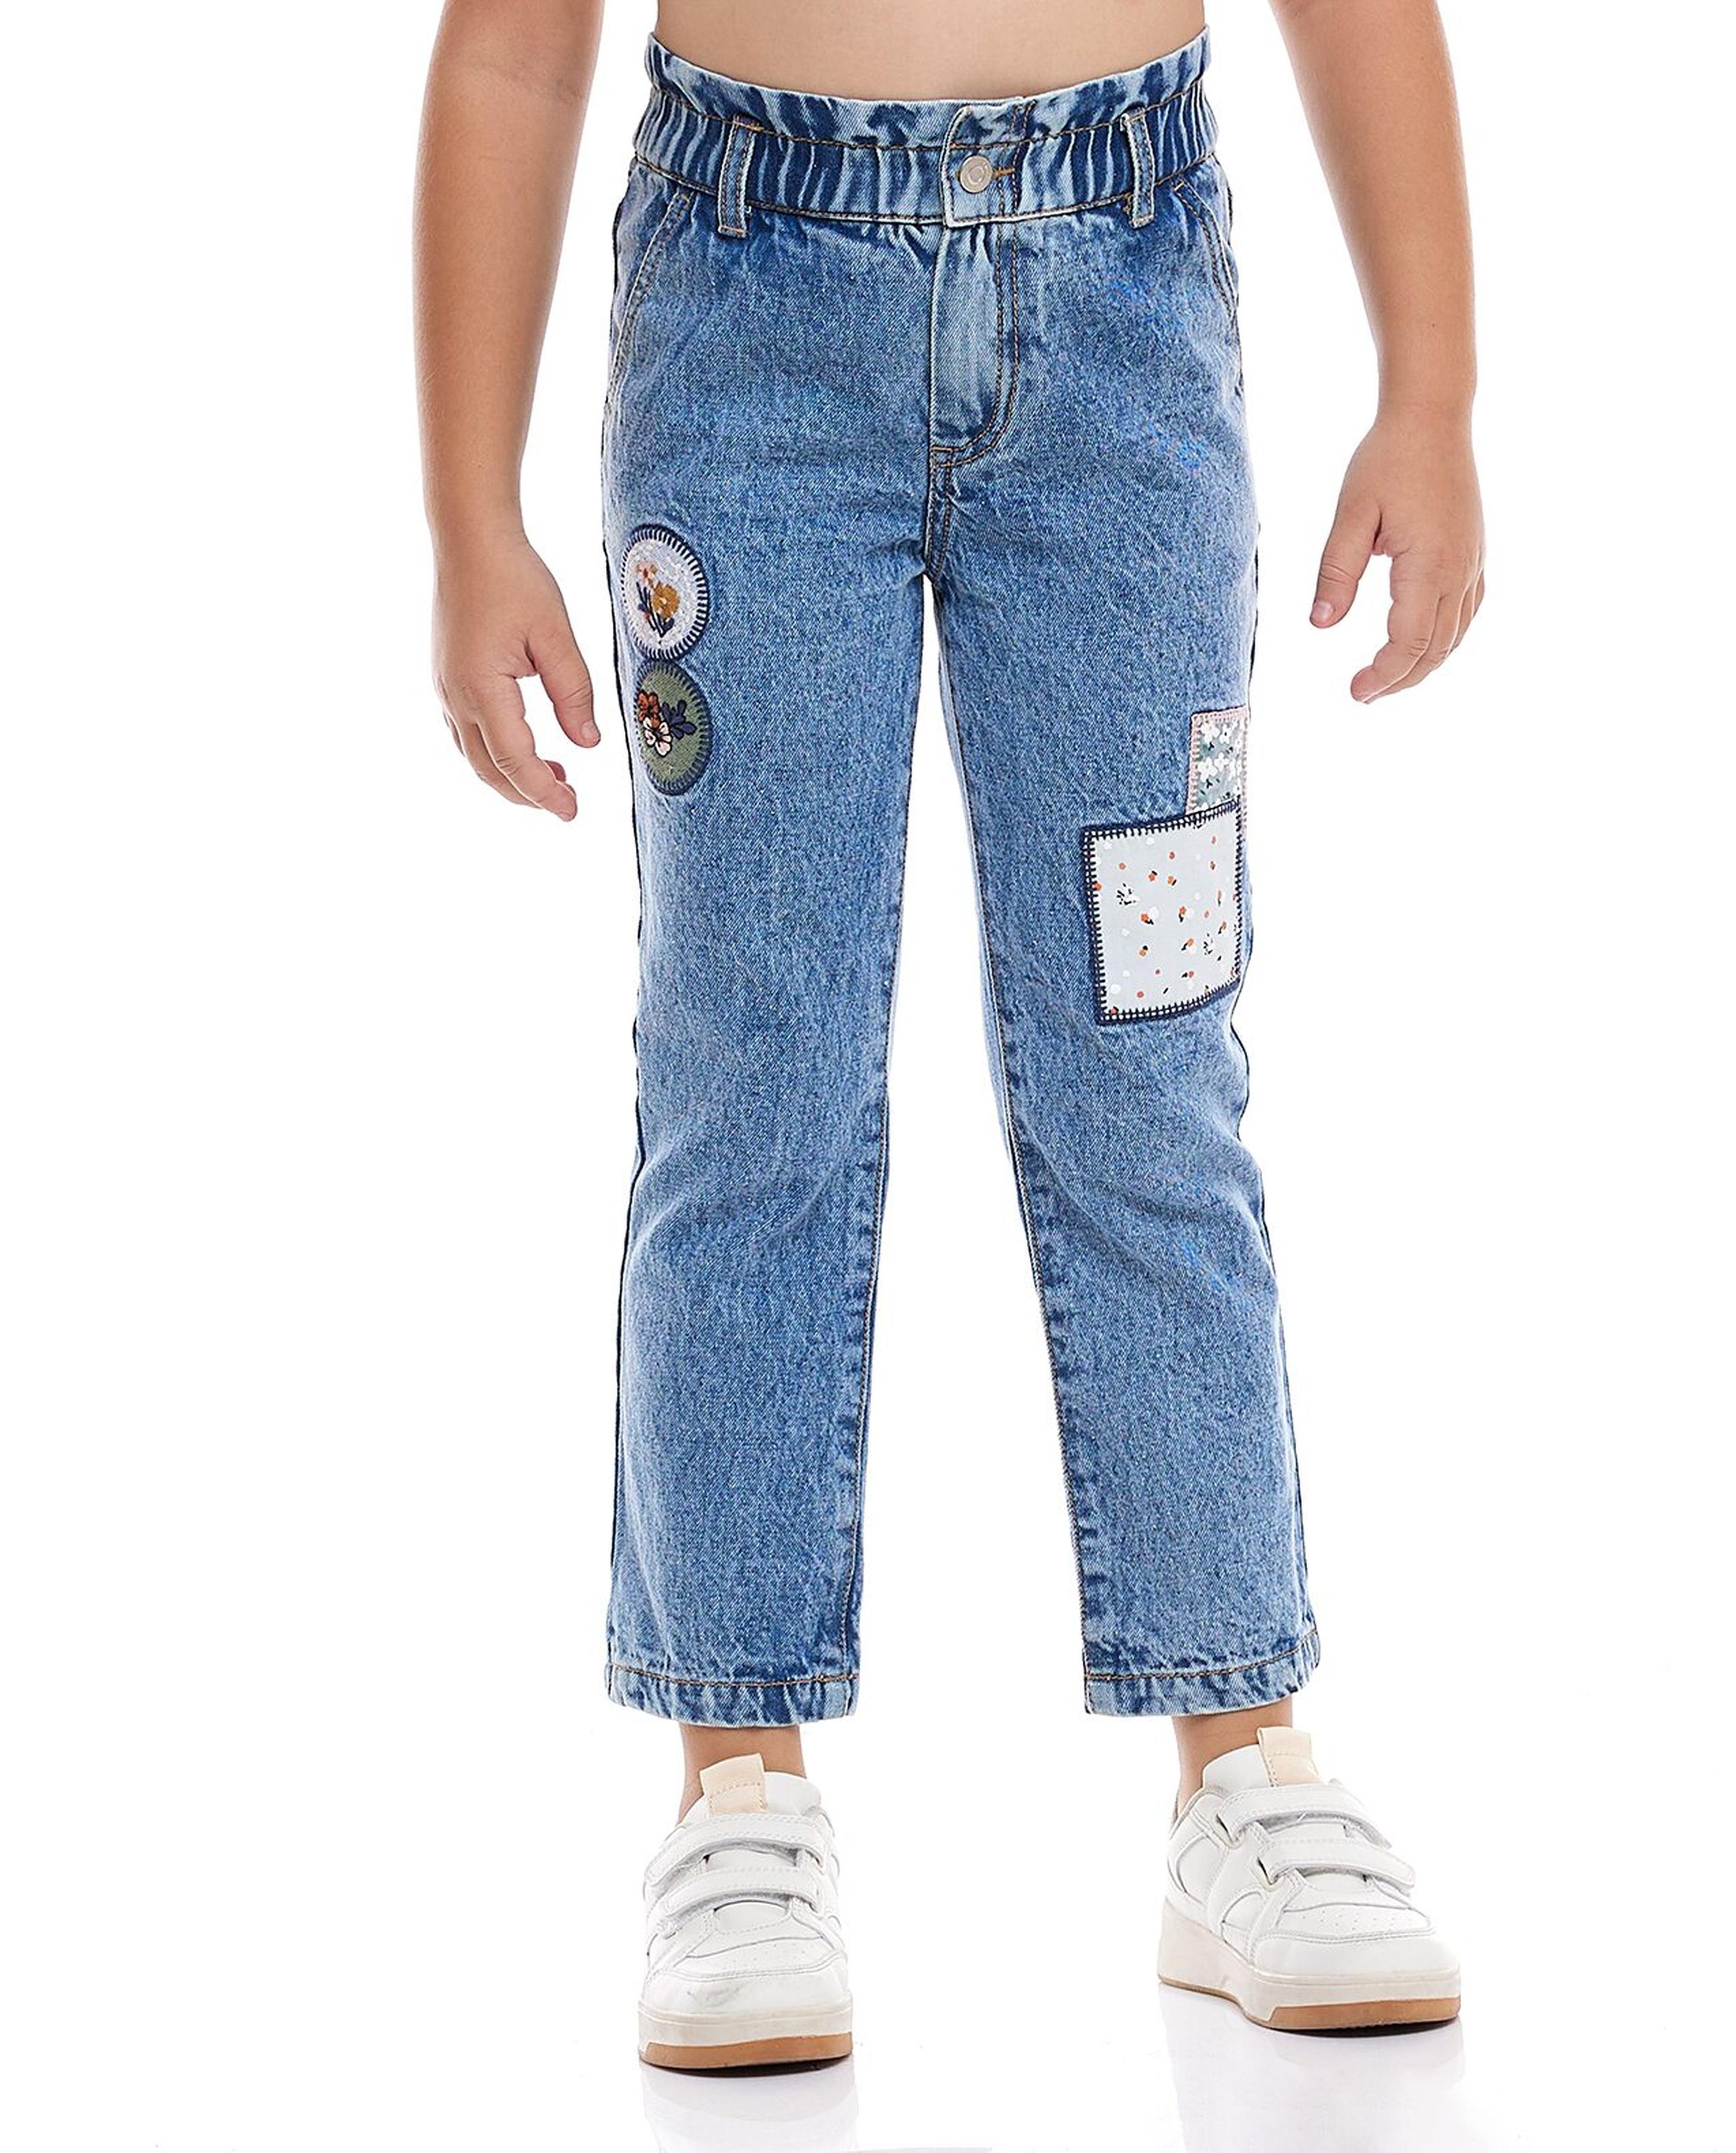 Applique Work Jeans with Button Closure